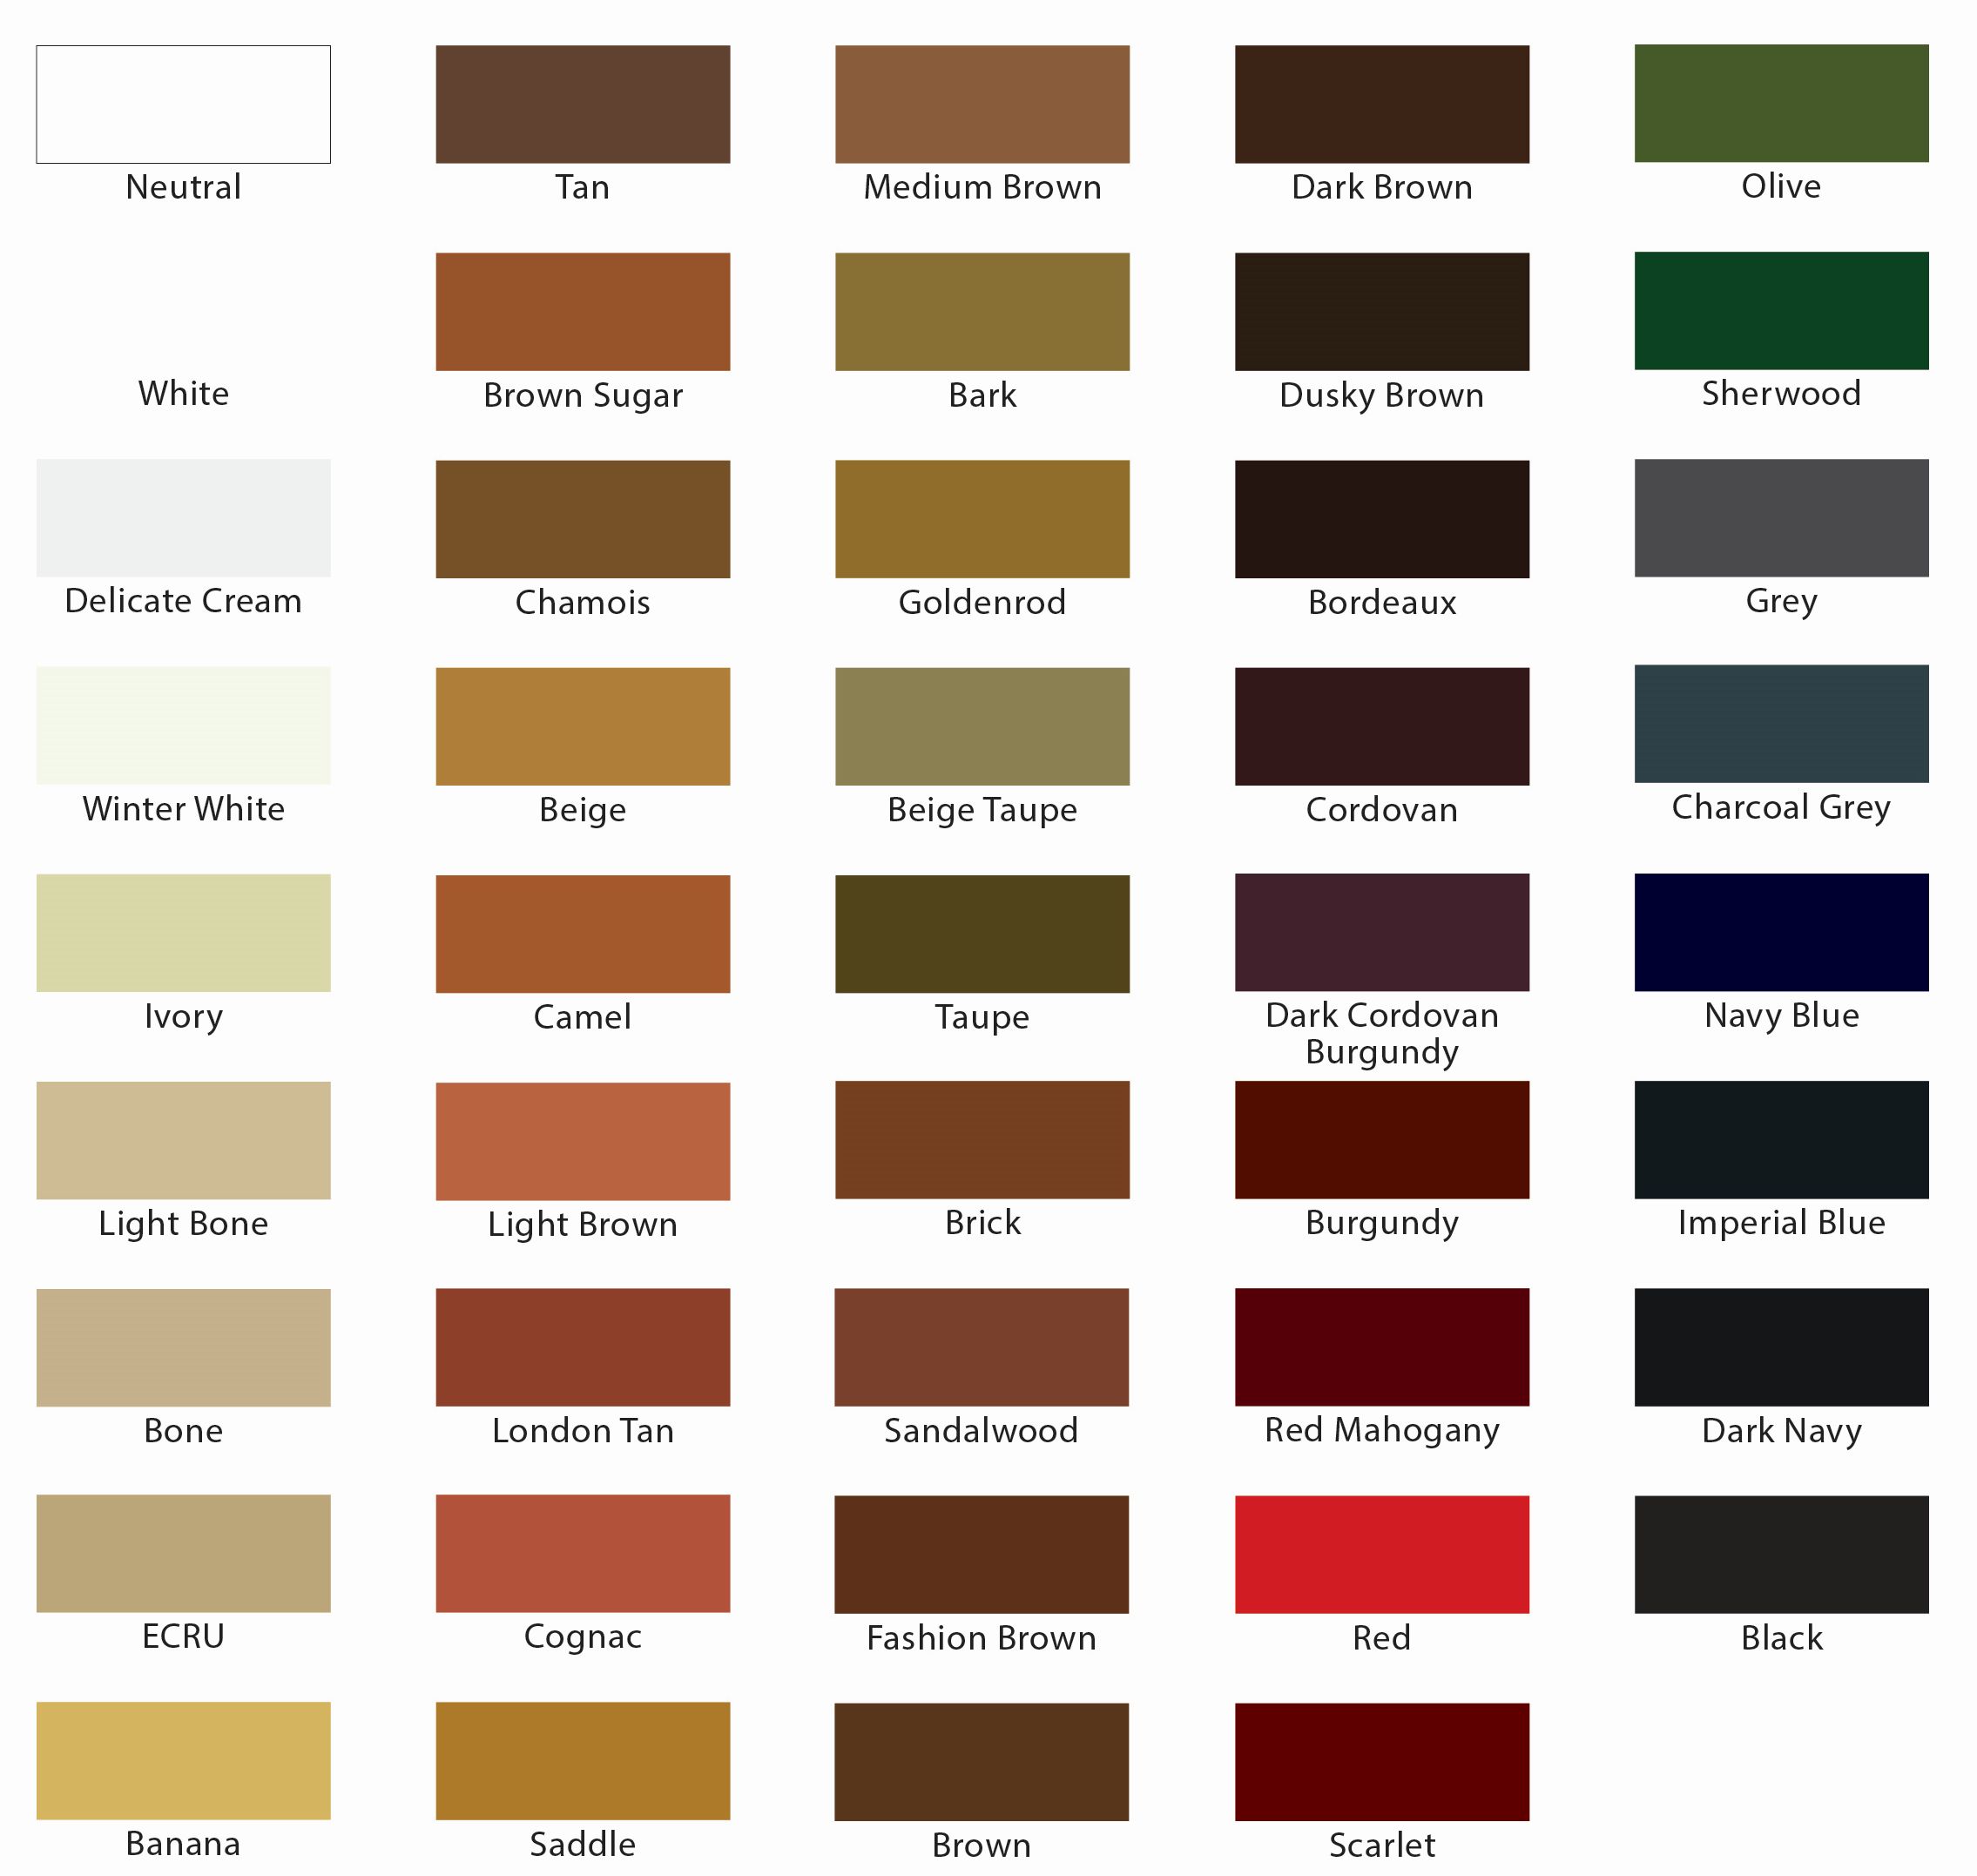 Lincoln Shoe Polish Color Chart My Shoe Supplies | peacecommission.kdsg ...